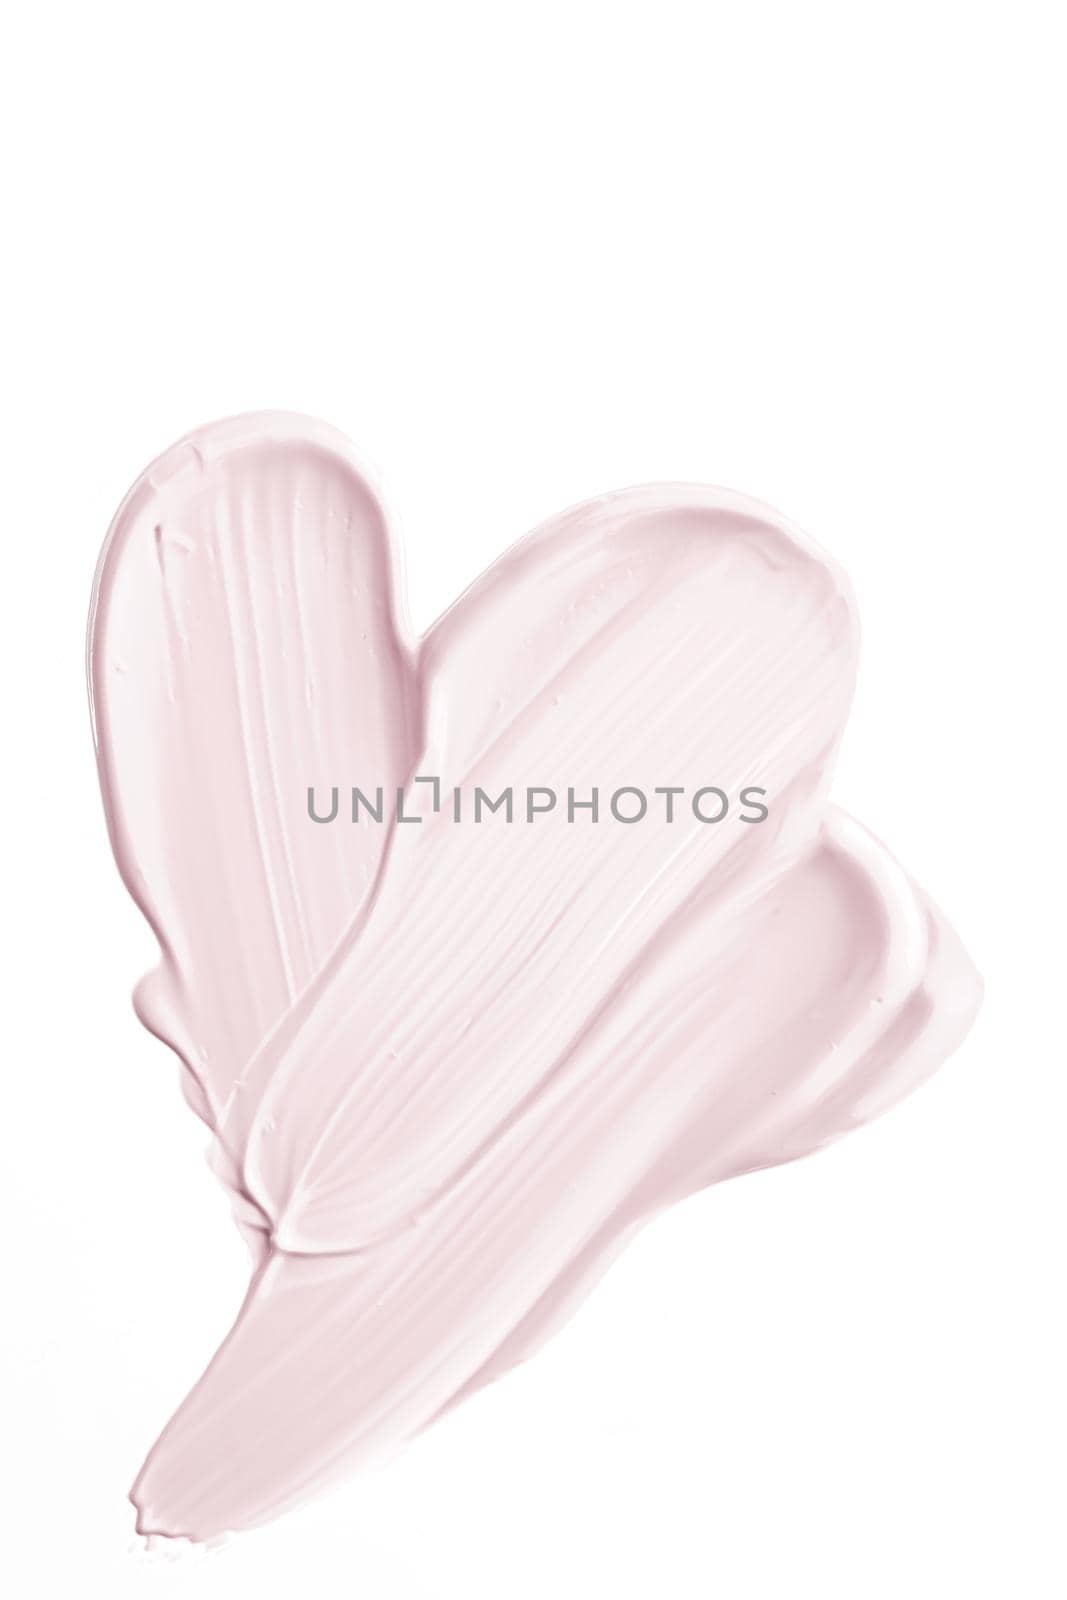 Pastel beauty swatch, skincare and makeup cosmetic product sample texture isolated on white background, make-up smudge, cream cosmetics smear or paint brush stroke by Anneleven